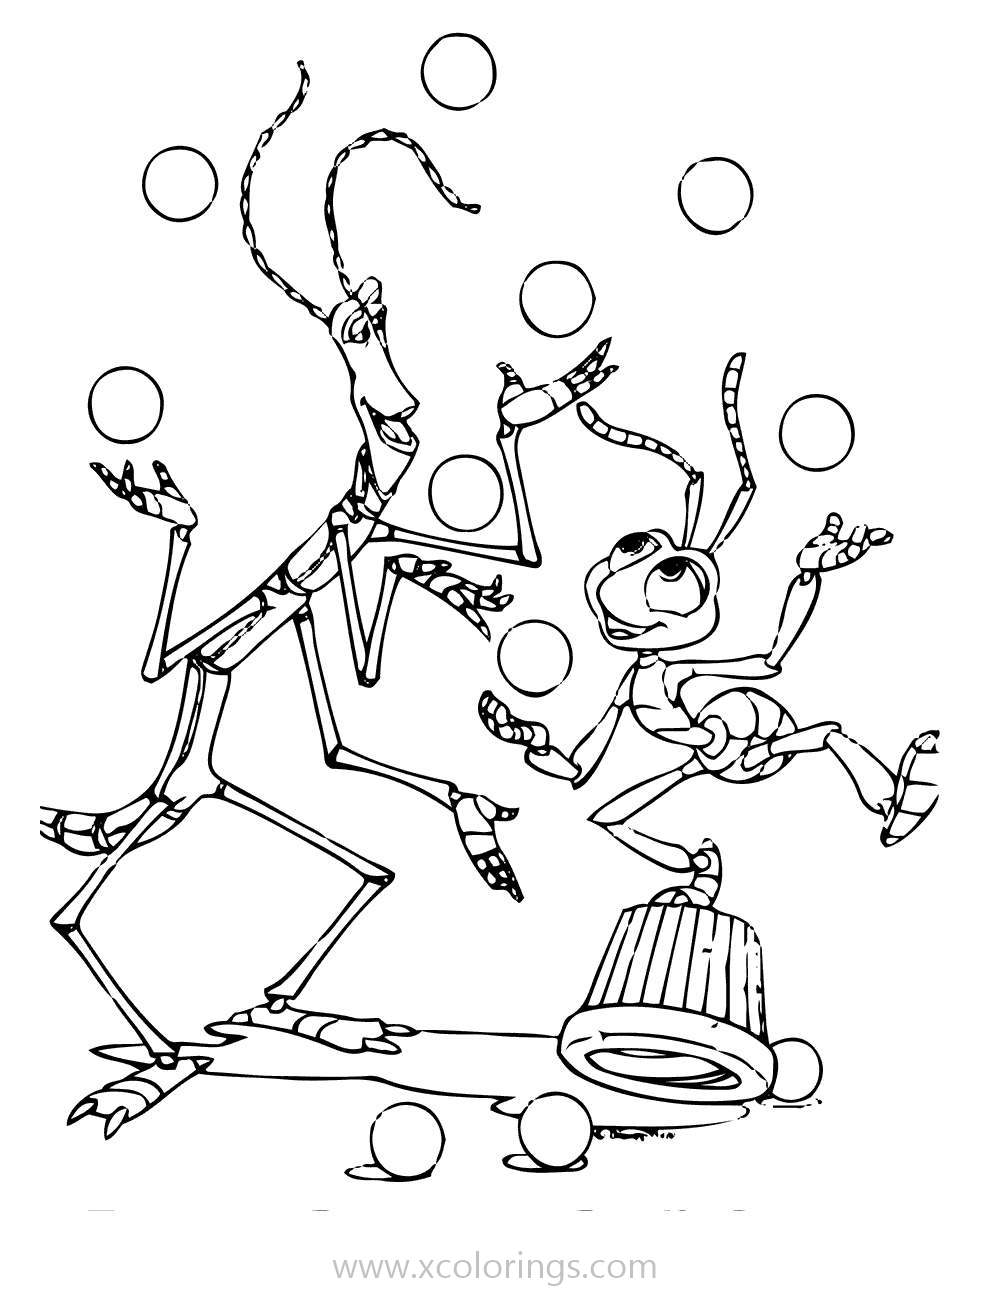 Free A Bugs Life Coloring Pages Slim And Flik printable